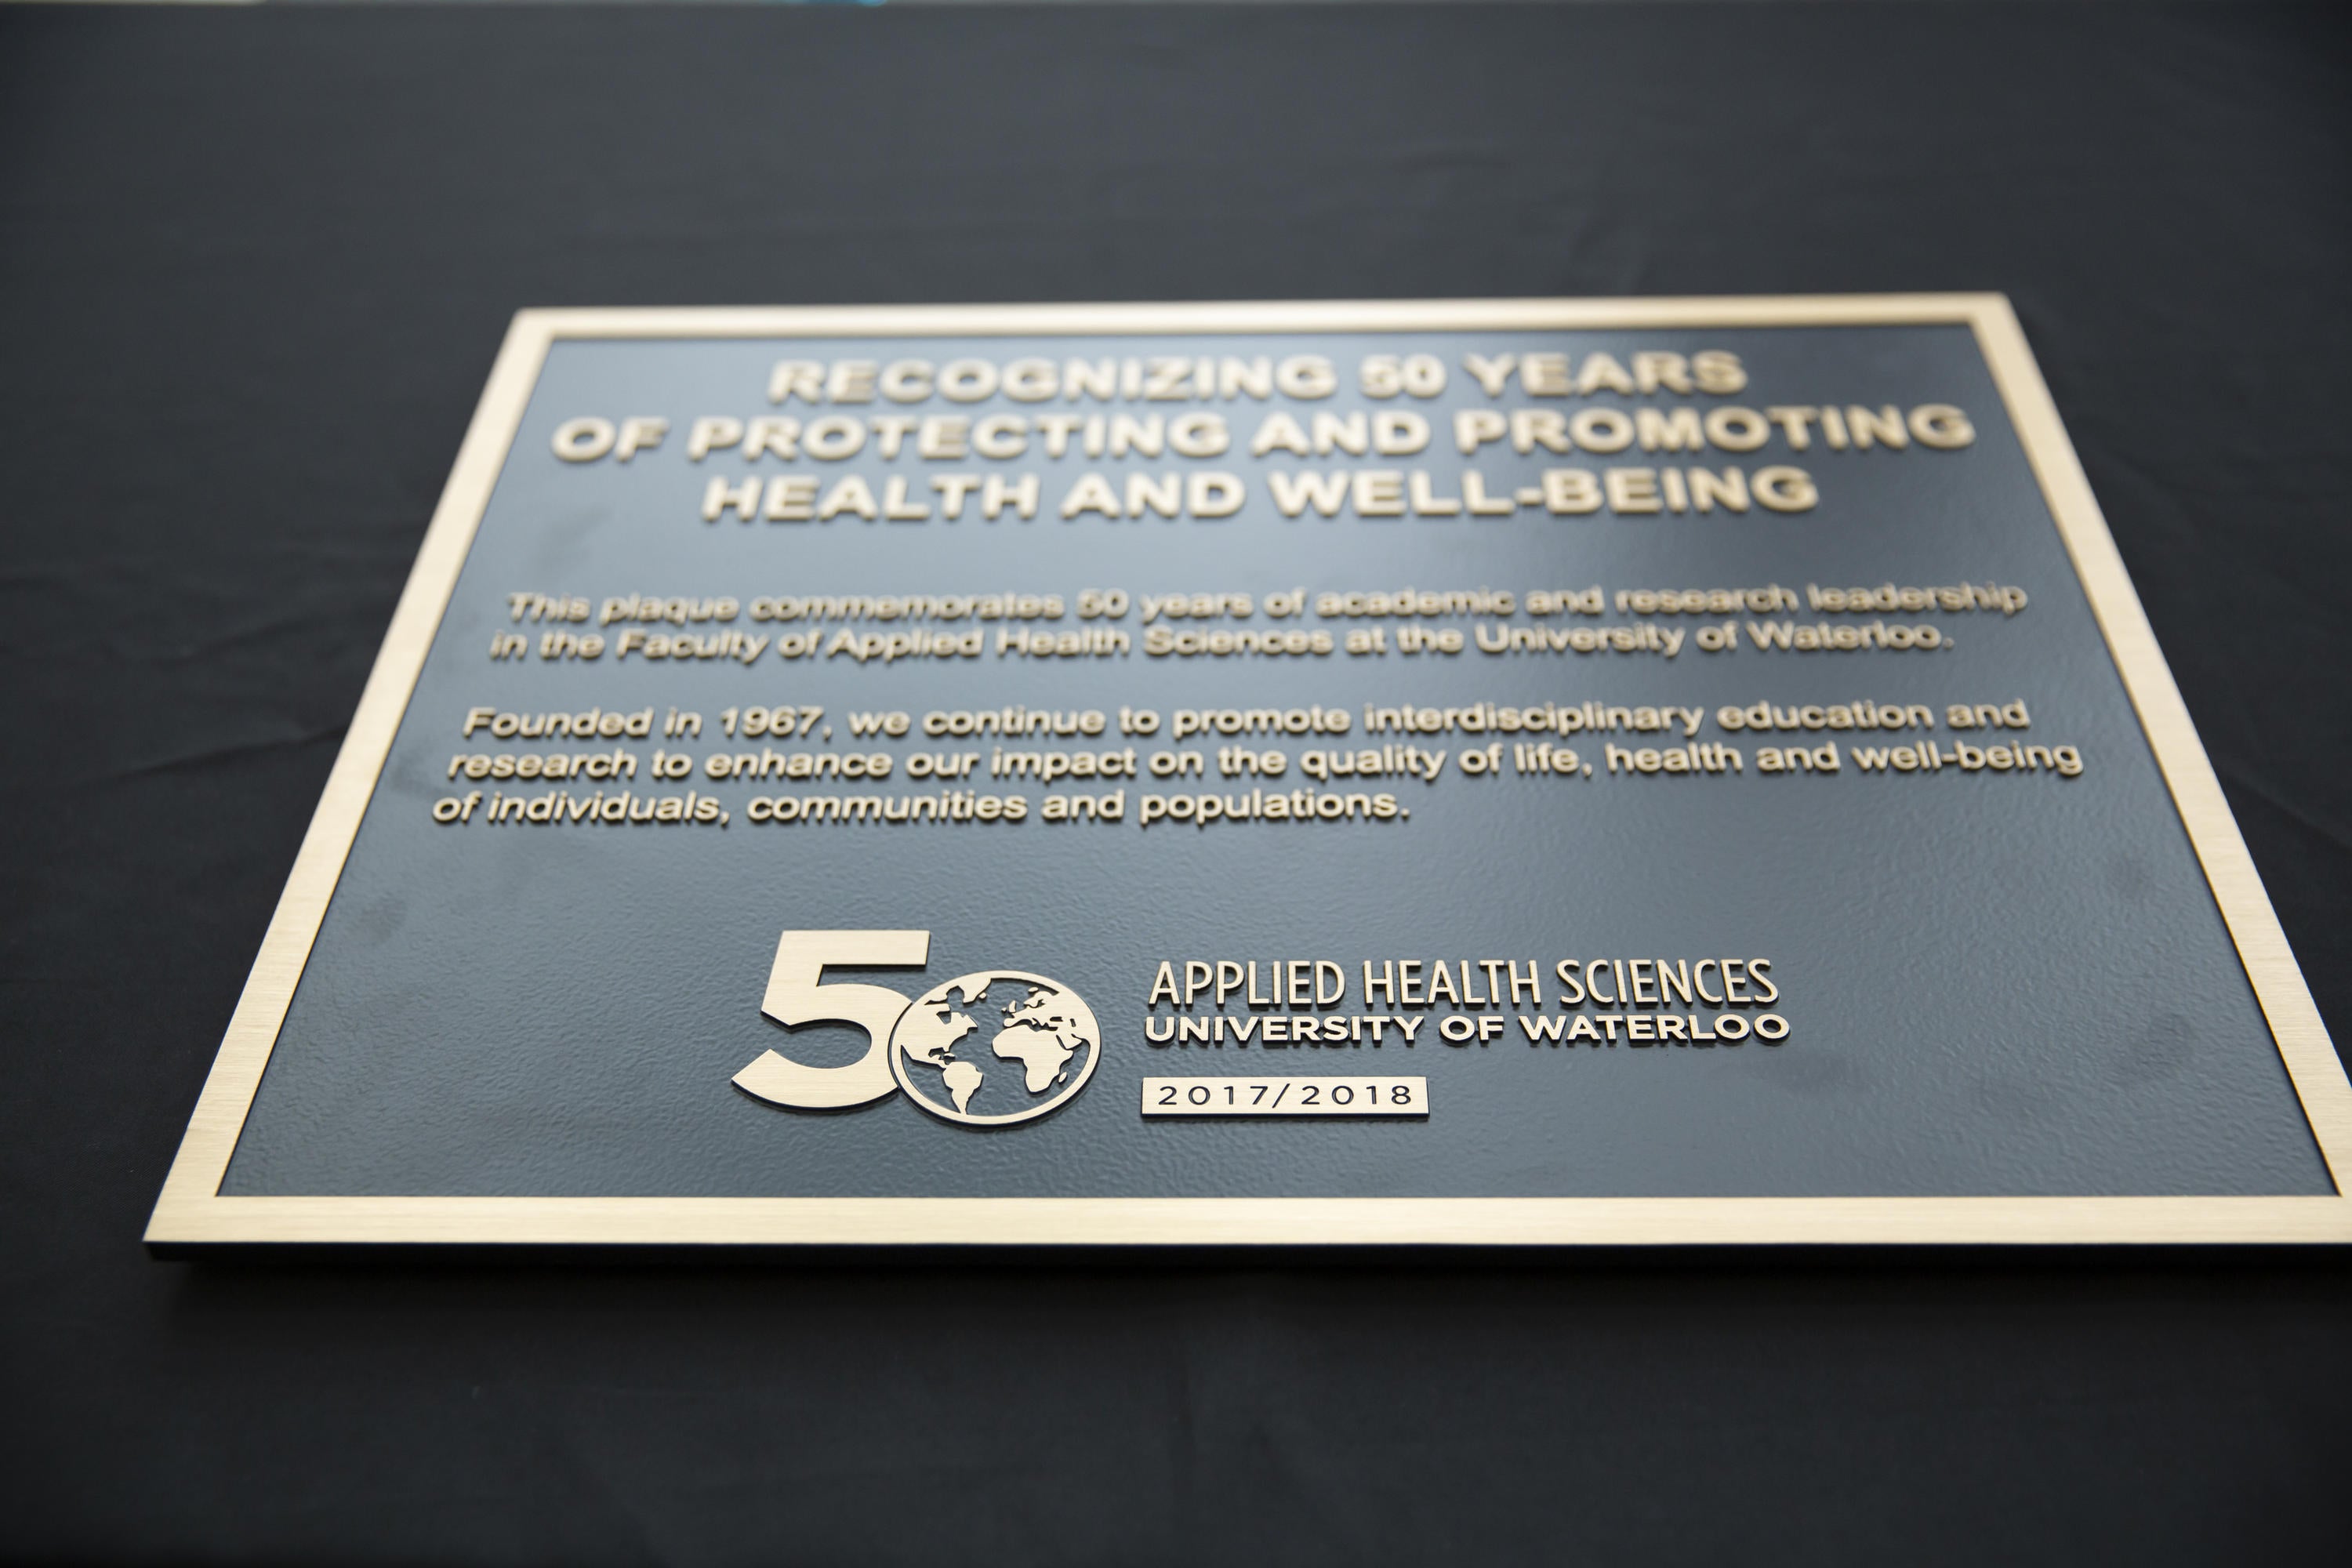 50th anniversary plaque that will be installed in the courtyard